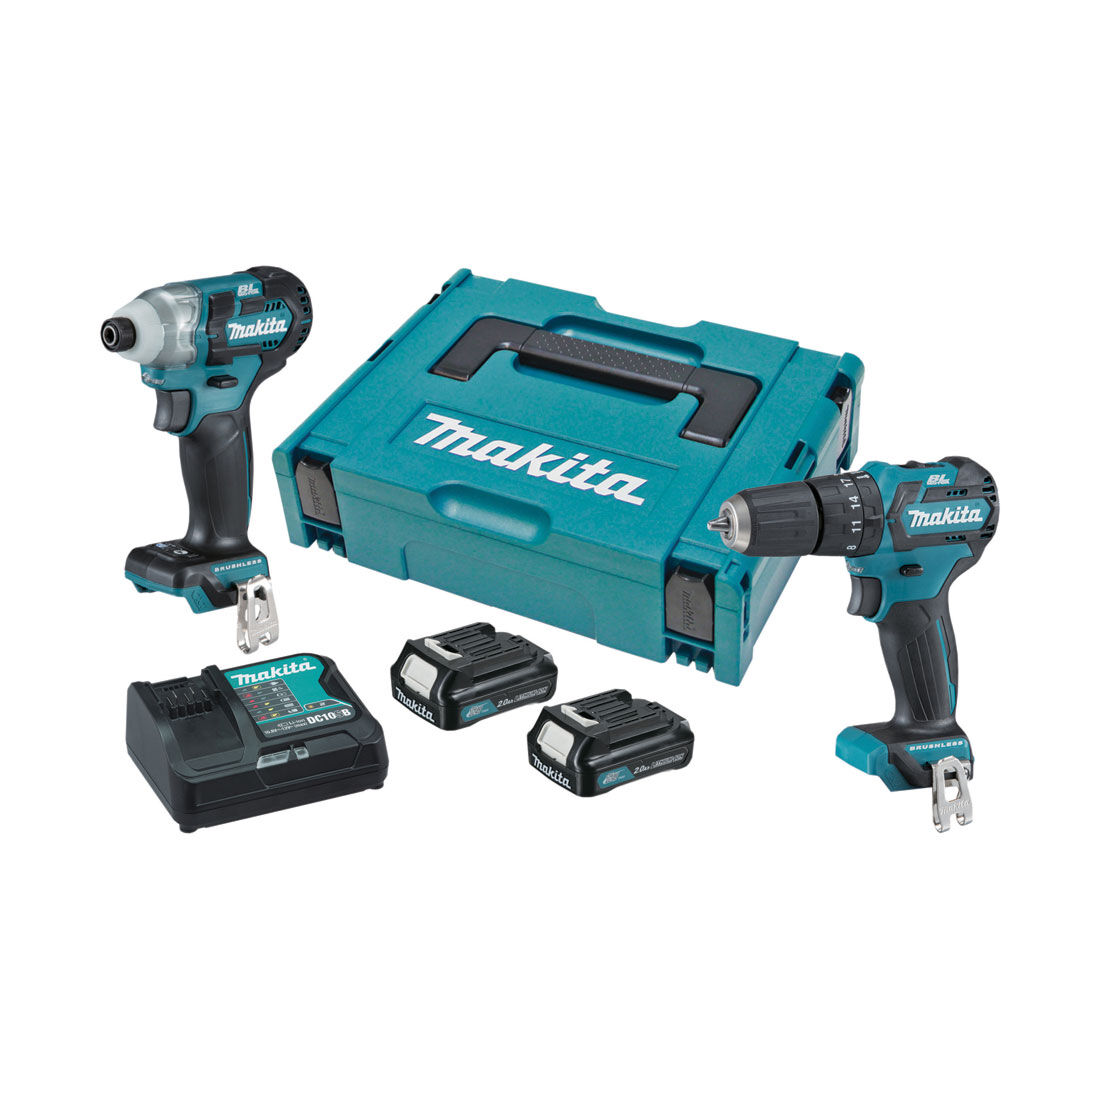 Makita 12V Brushless 2 Piece Drill And Impact Driver Kit, , scanz_hi-res